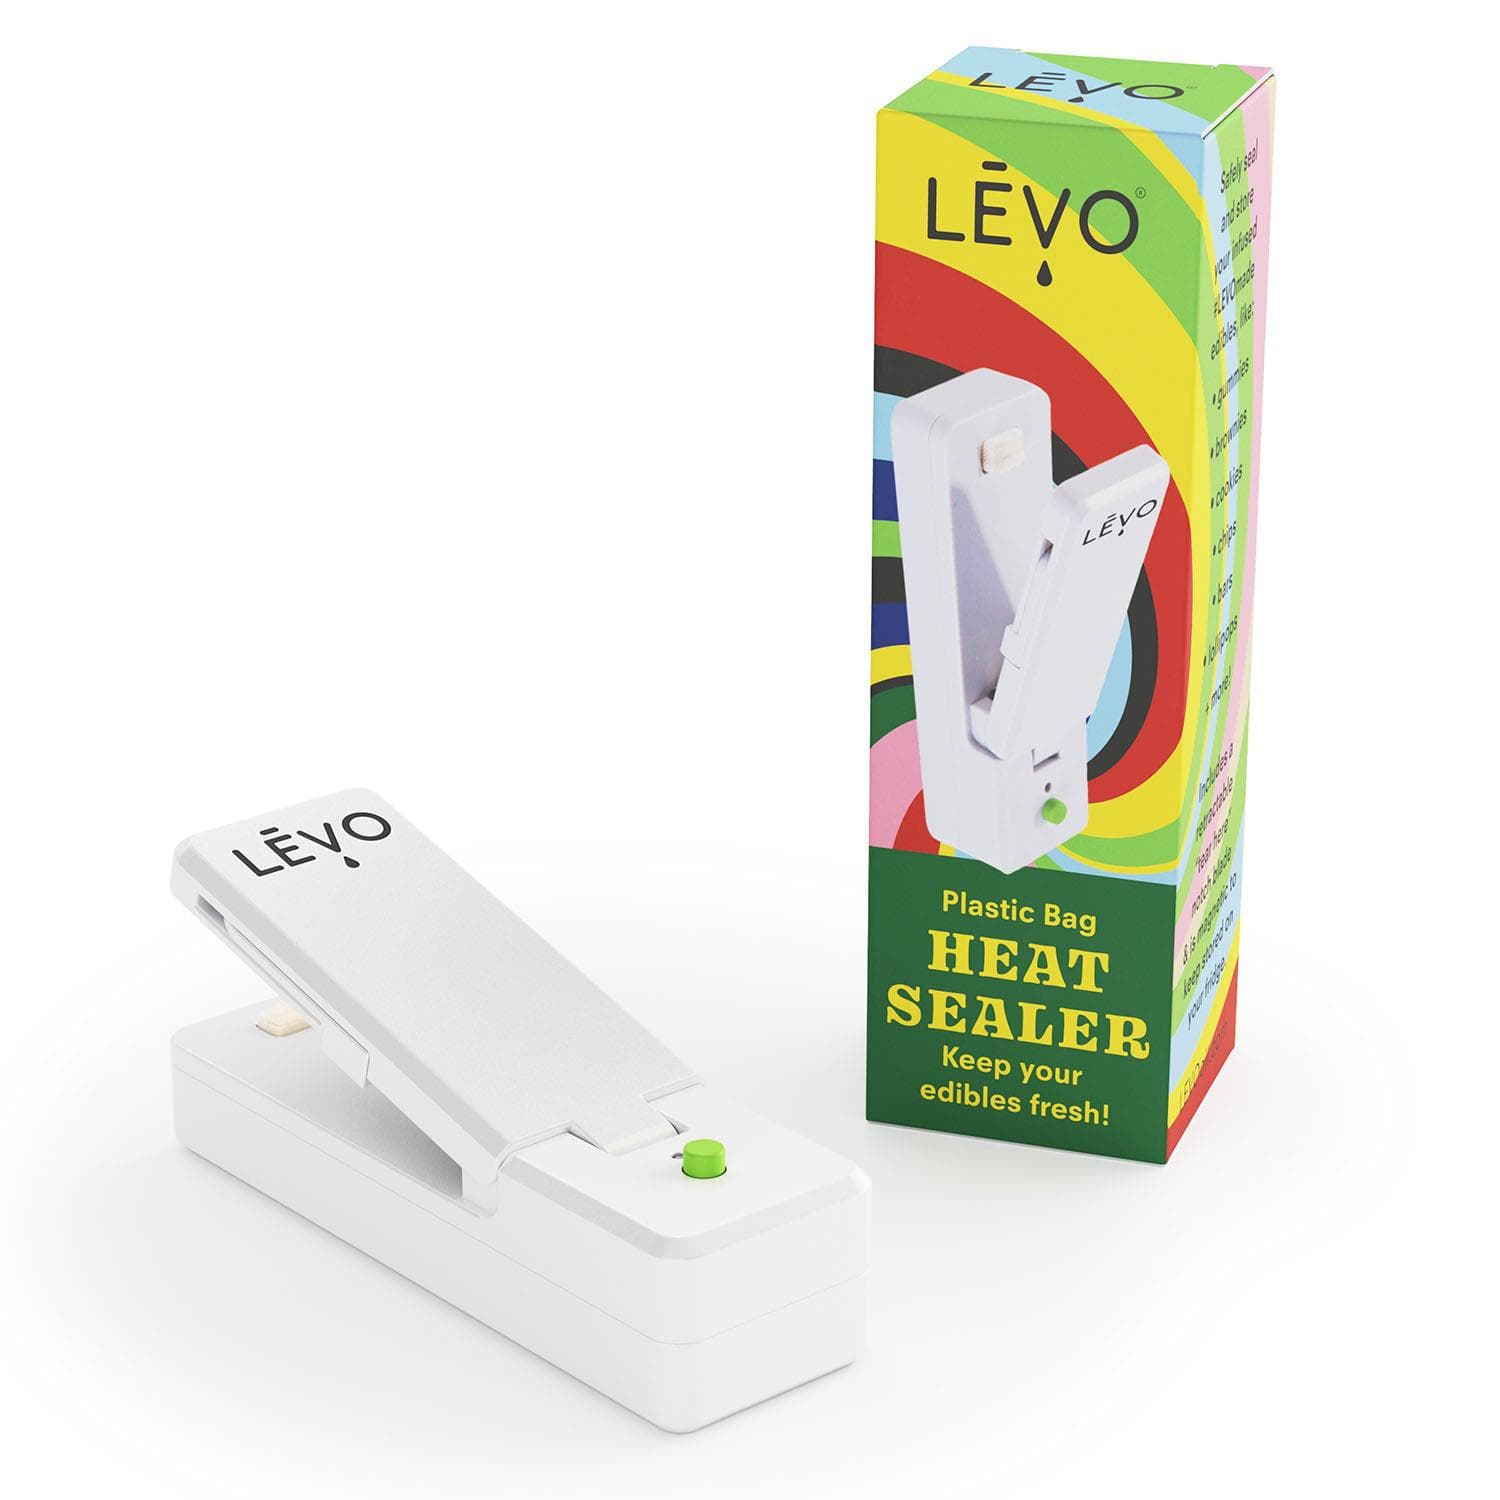 LEVO heat sealer for plastic bags to keep your homemade DIY edibles fresh!